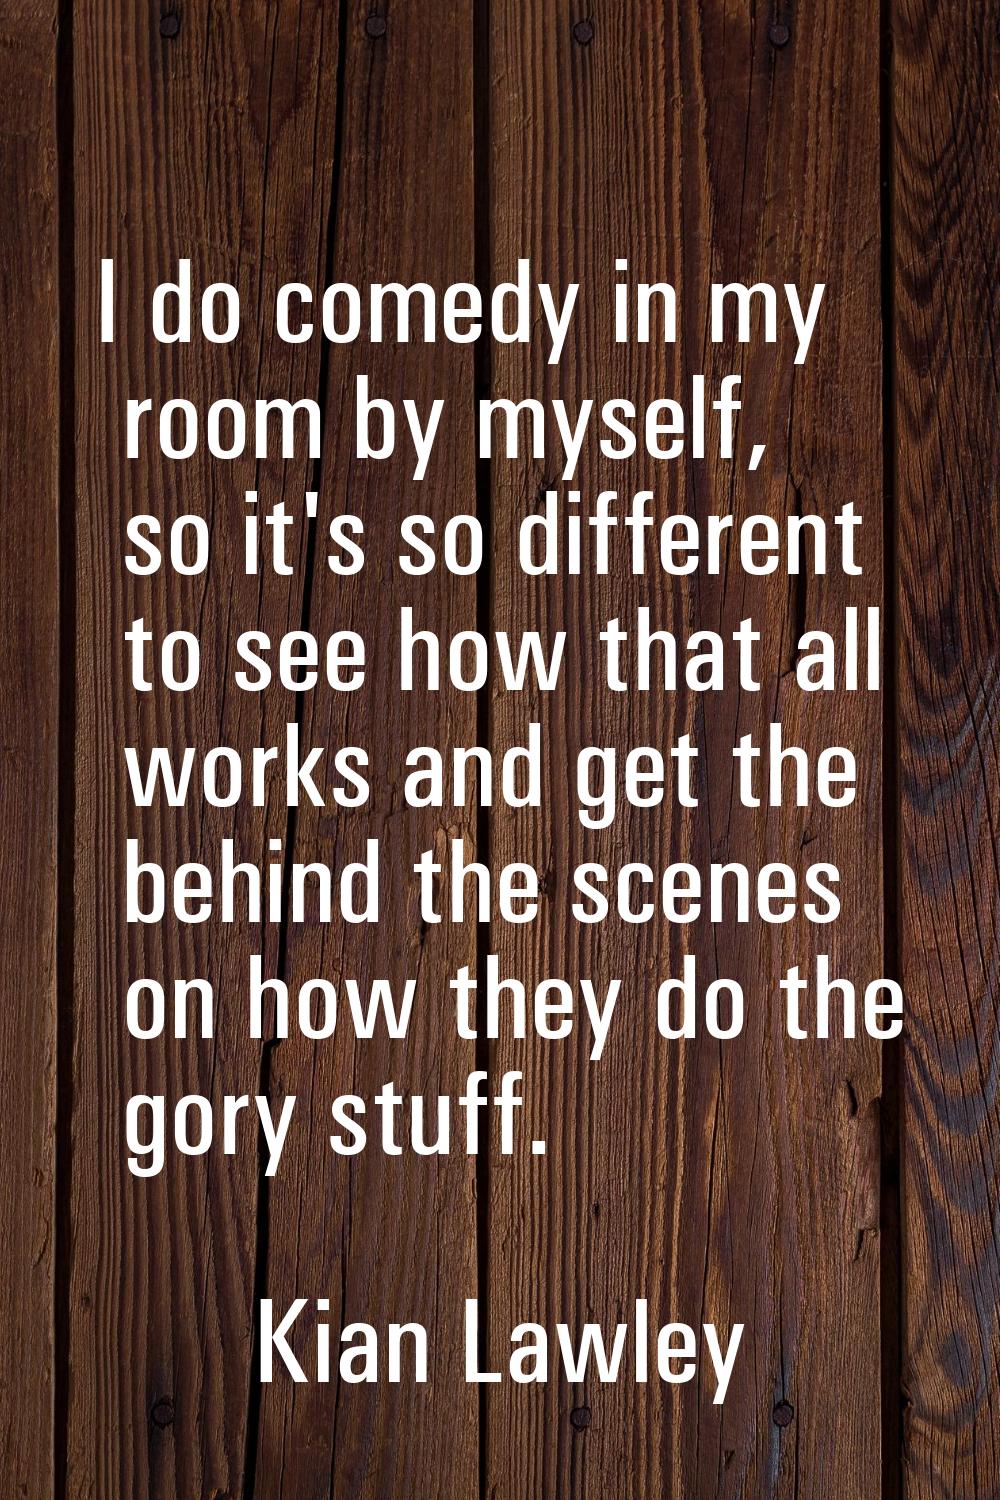 I do comedy in my room by myself, so it's so different to see how that all works and get the behind